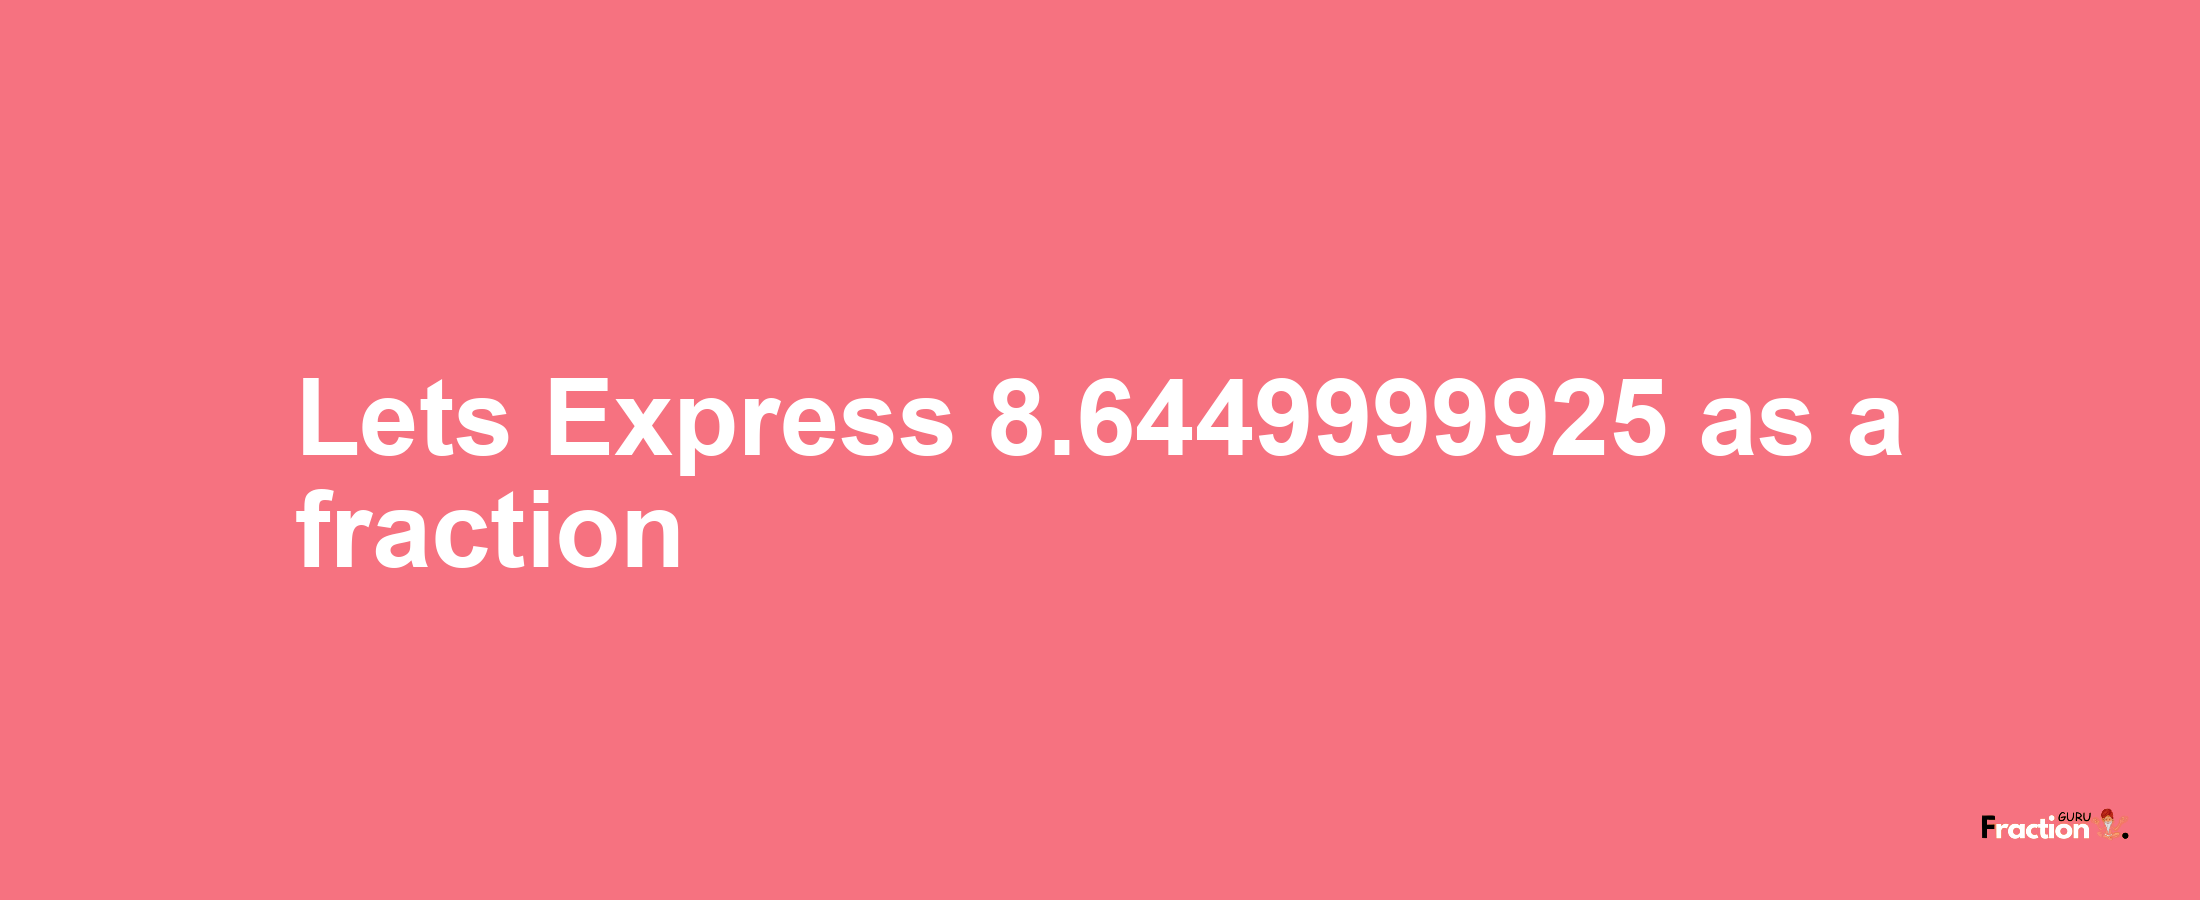 Lets Express 8.6449999925 as afraction